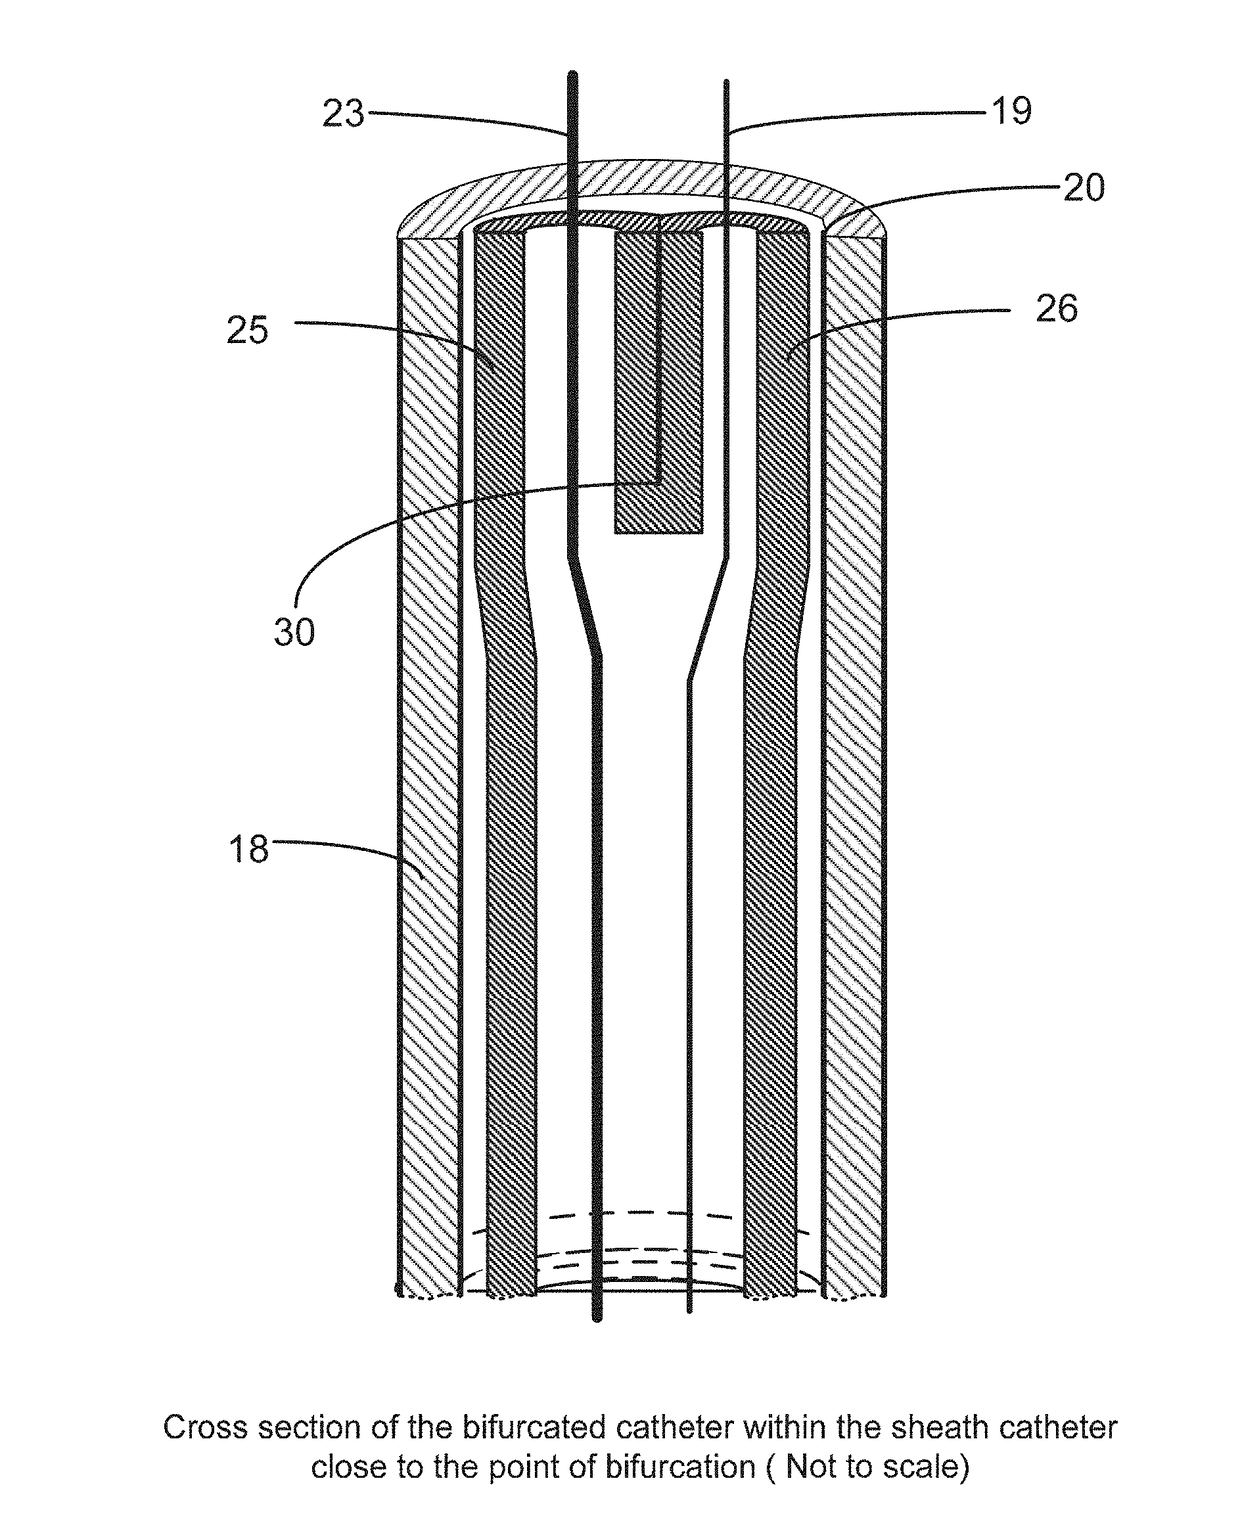 Apparatus and method for stabilization of procedural catheter in tortuous vessels